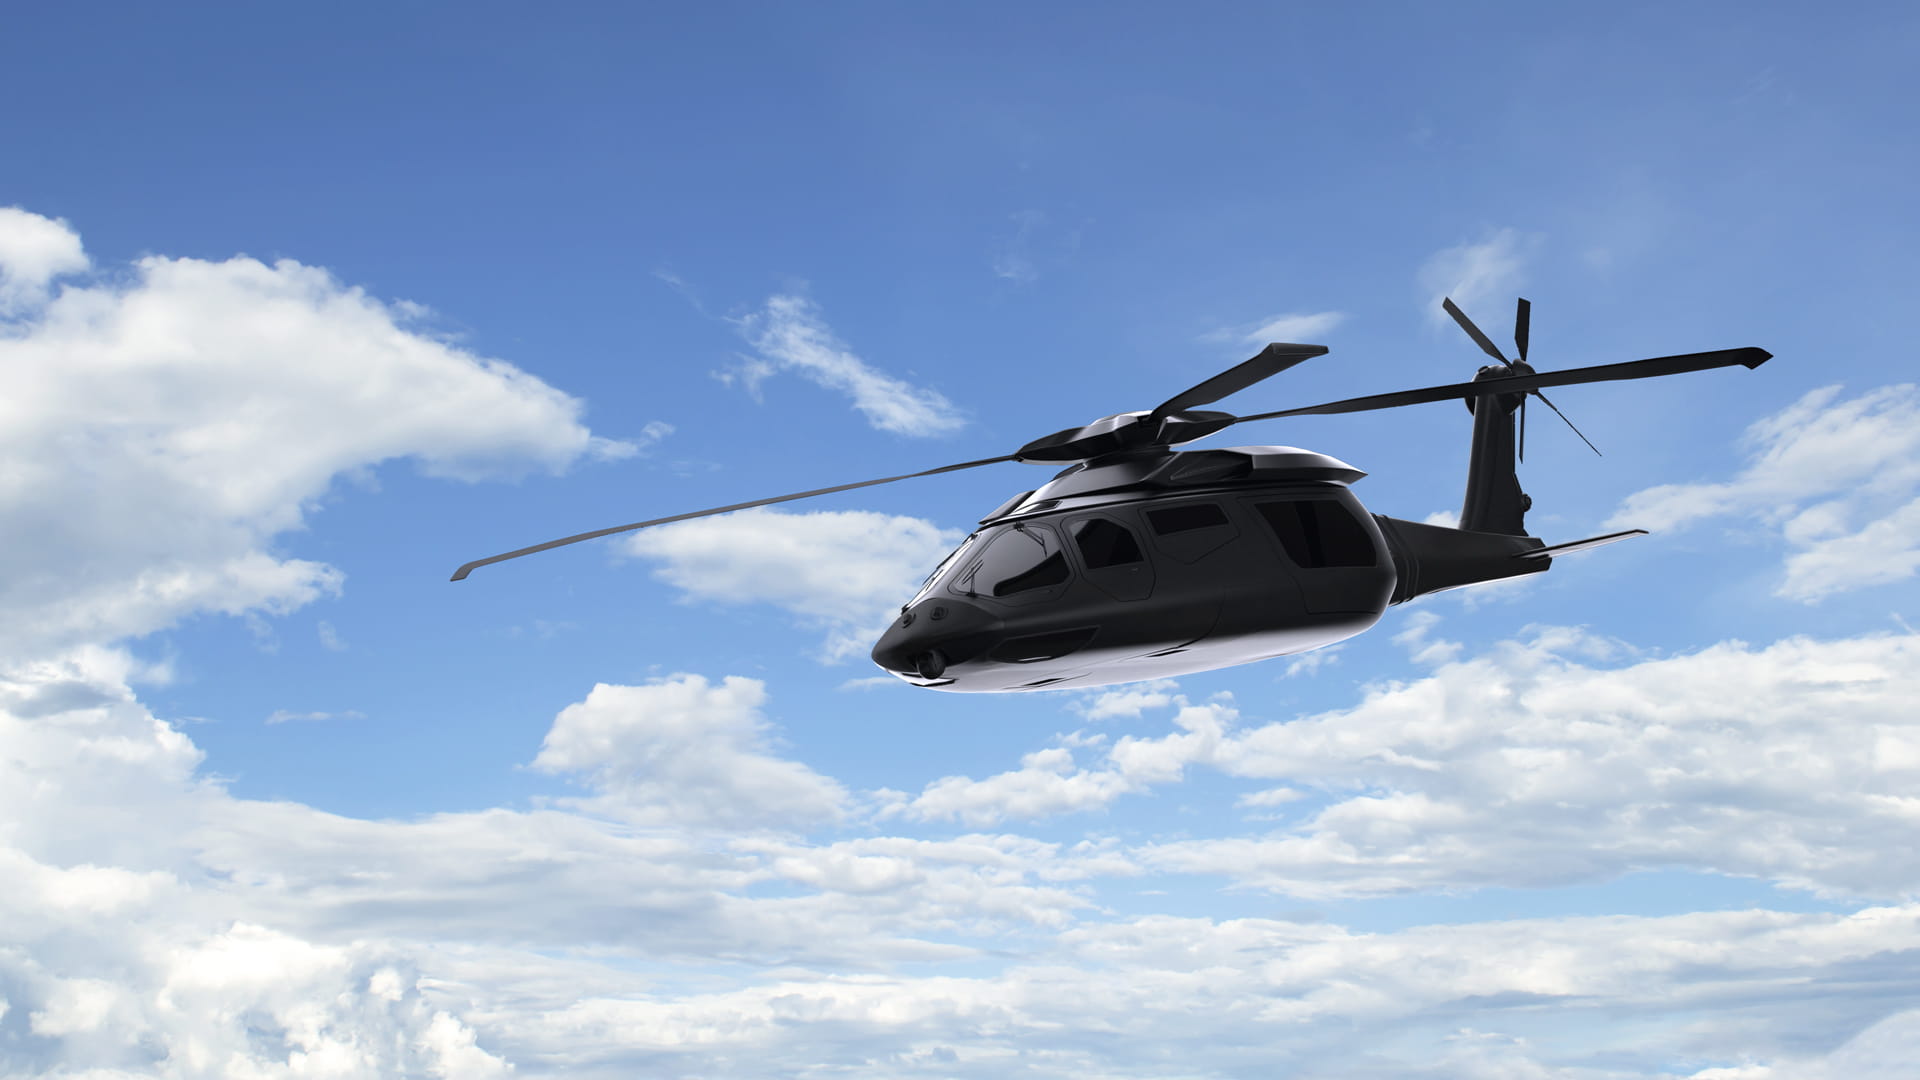 Future Vertical Lift helicopter in flight